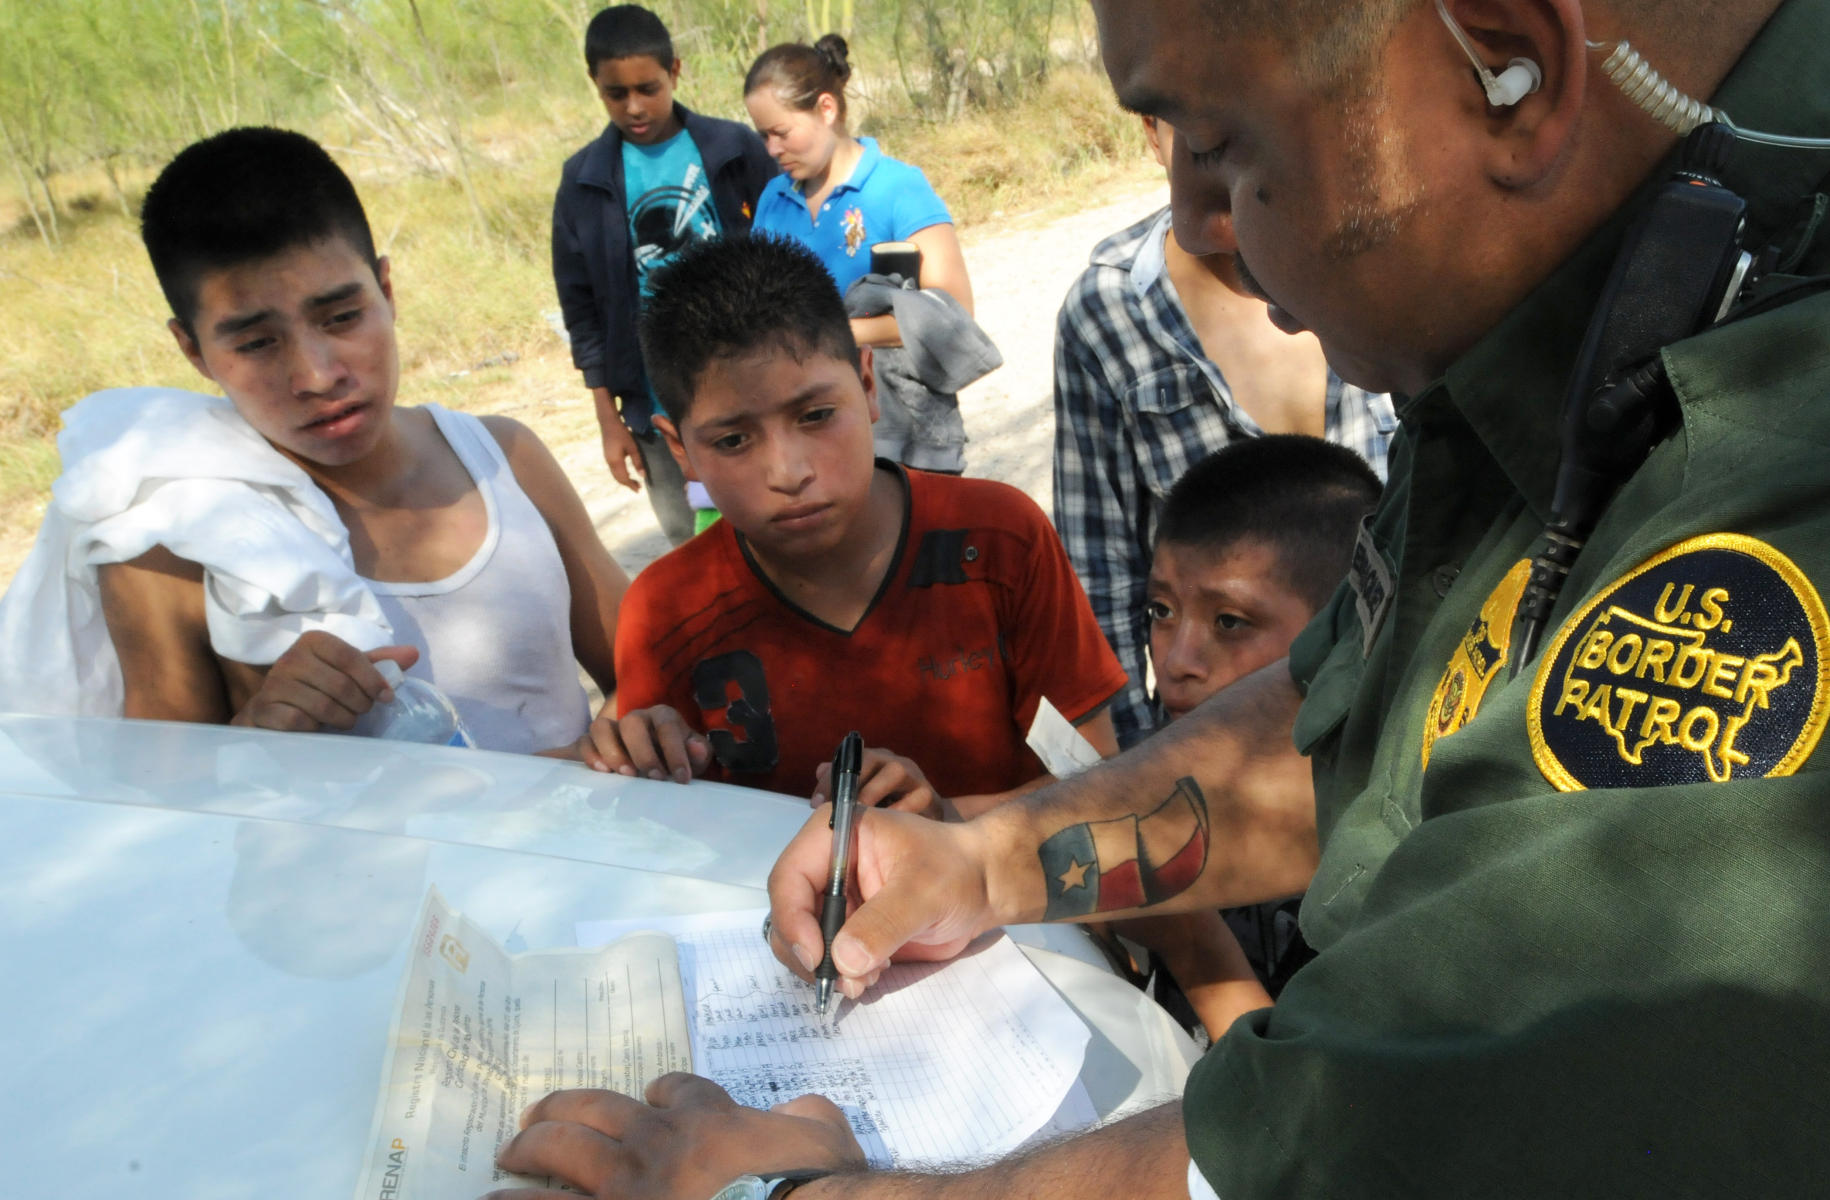 A Border Patrol Officer records the names of Central American children apprehended for illegally entering the U.S. from Mexico. 